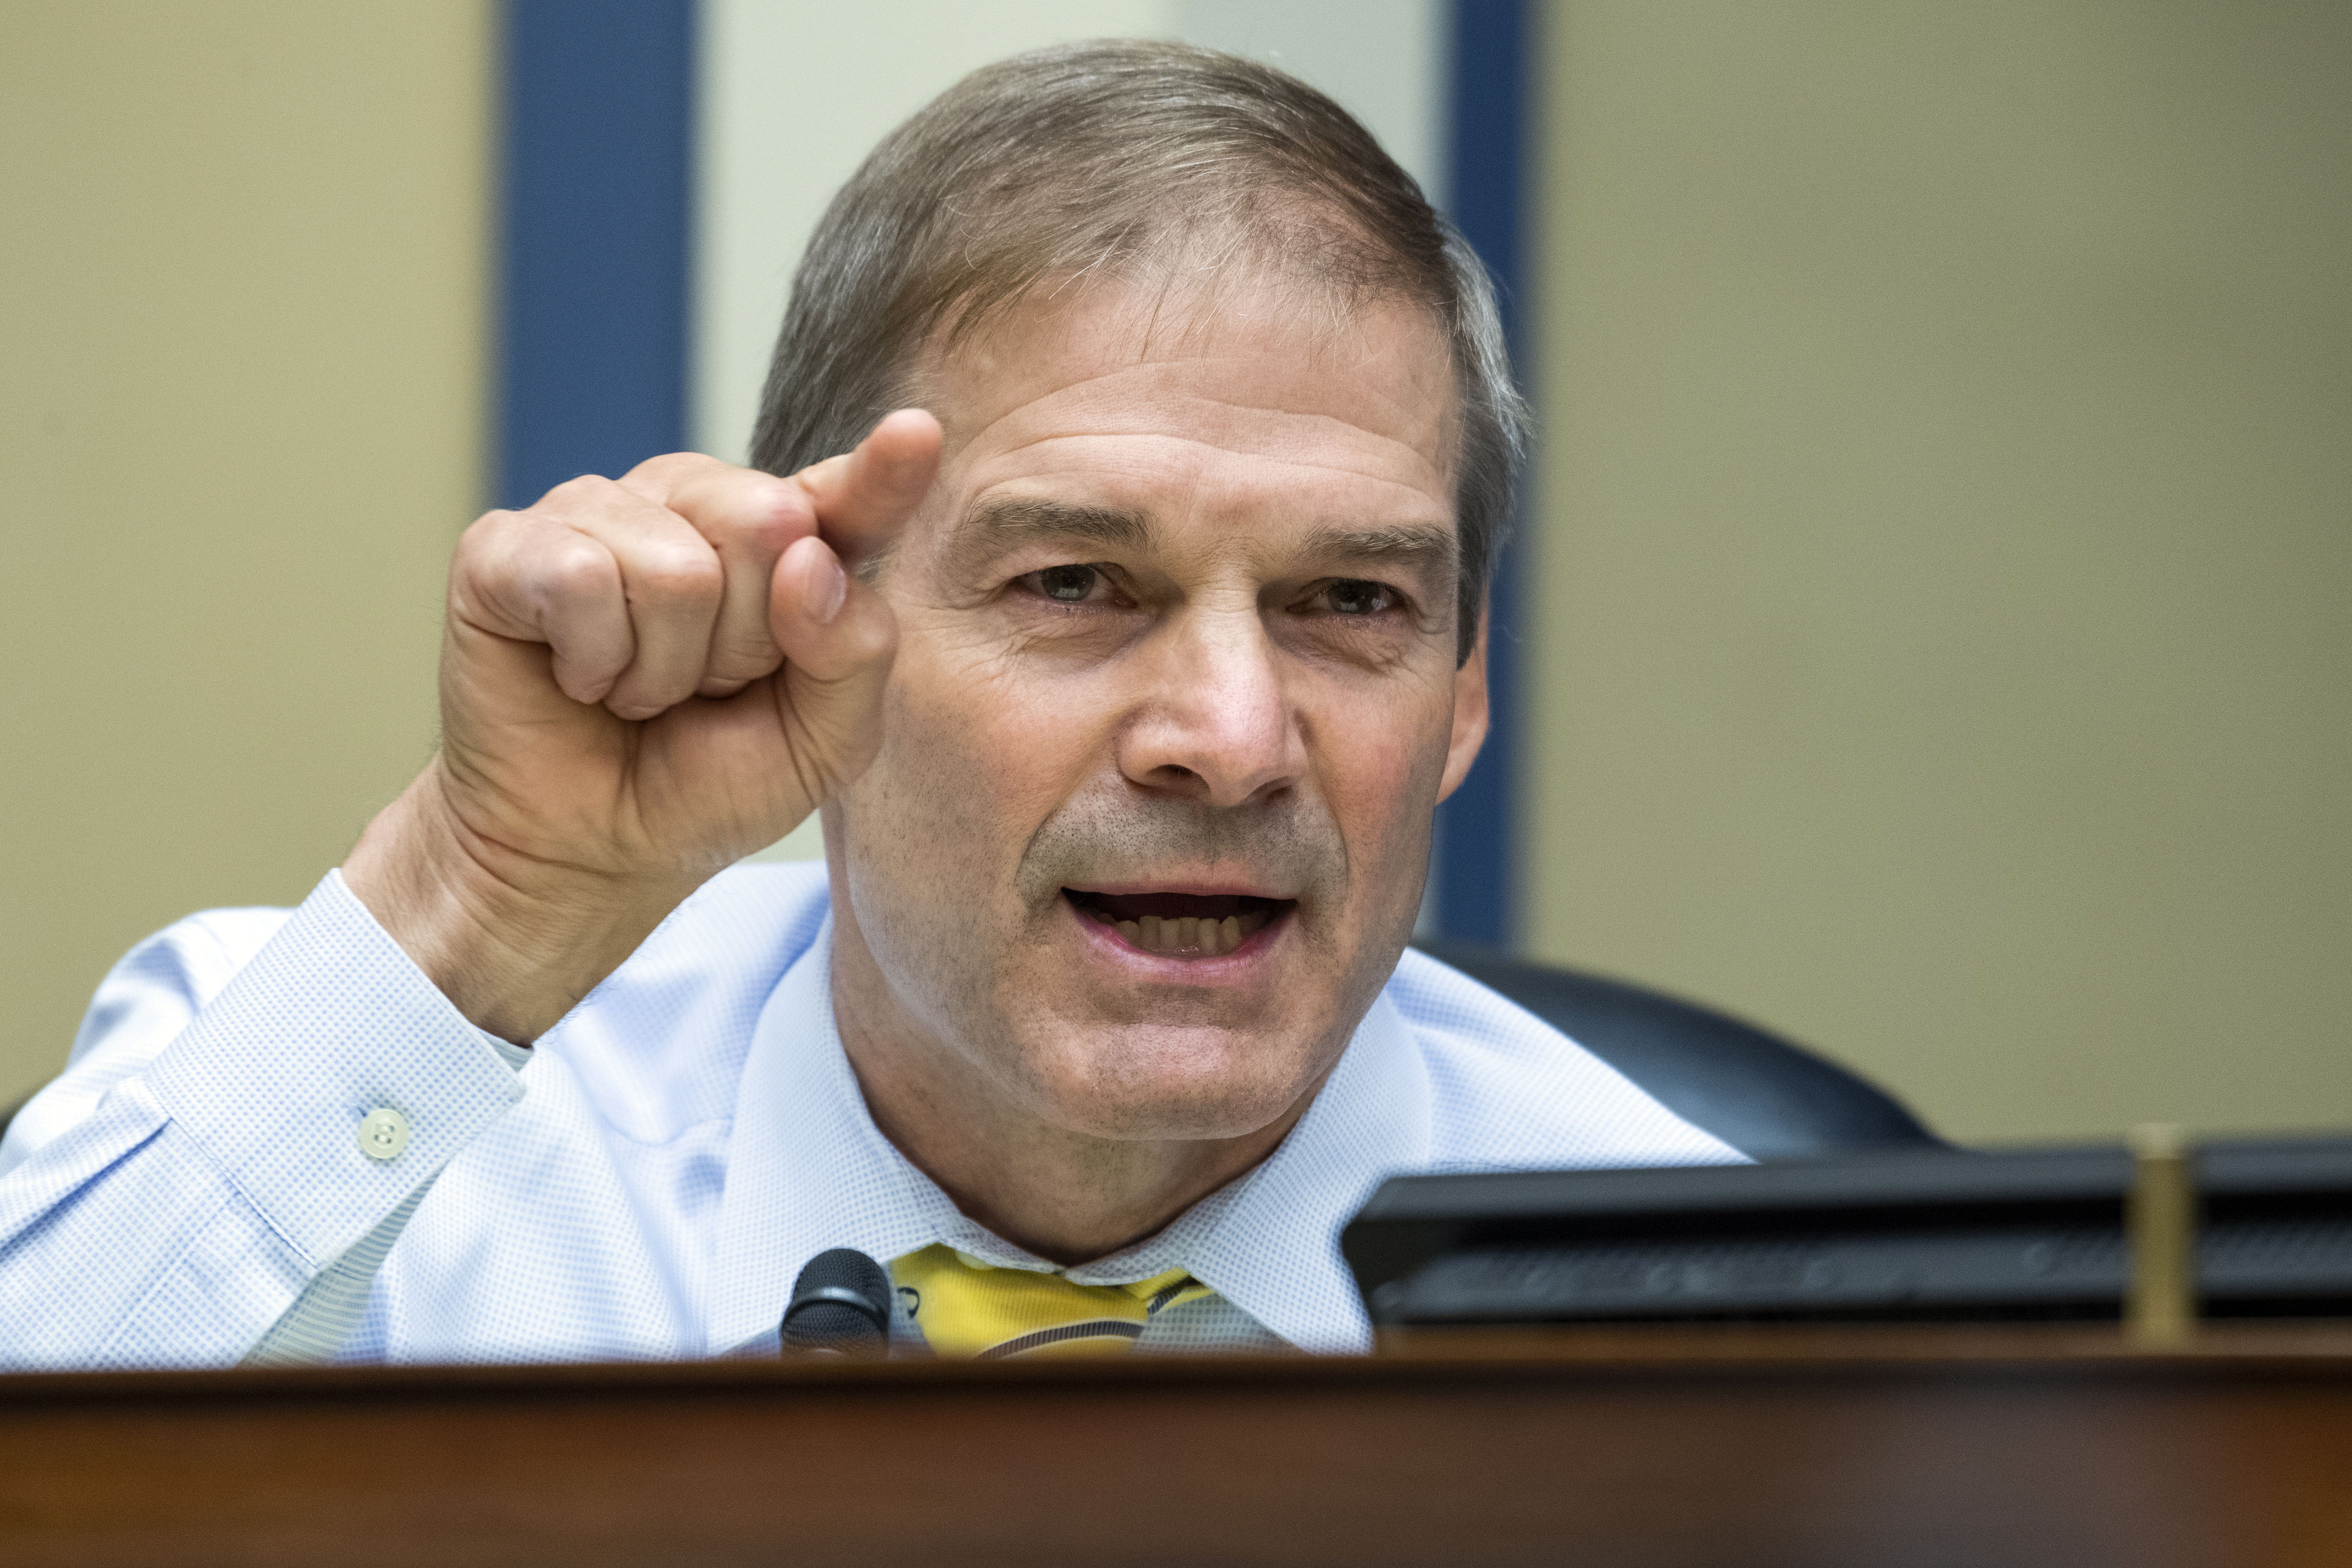 Rep. Jim Jordan, R-Ohio, must now face questioning about the Jan 6 insurrection at the U.S. Capitol building.